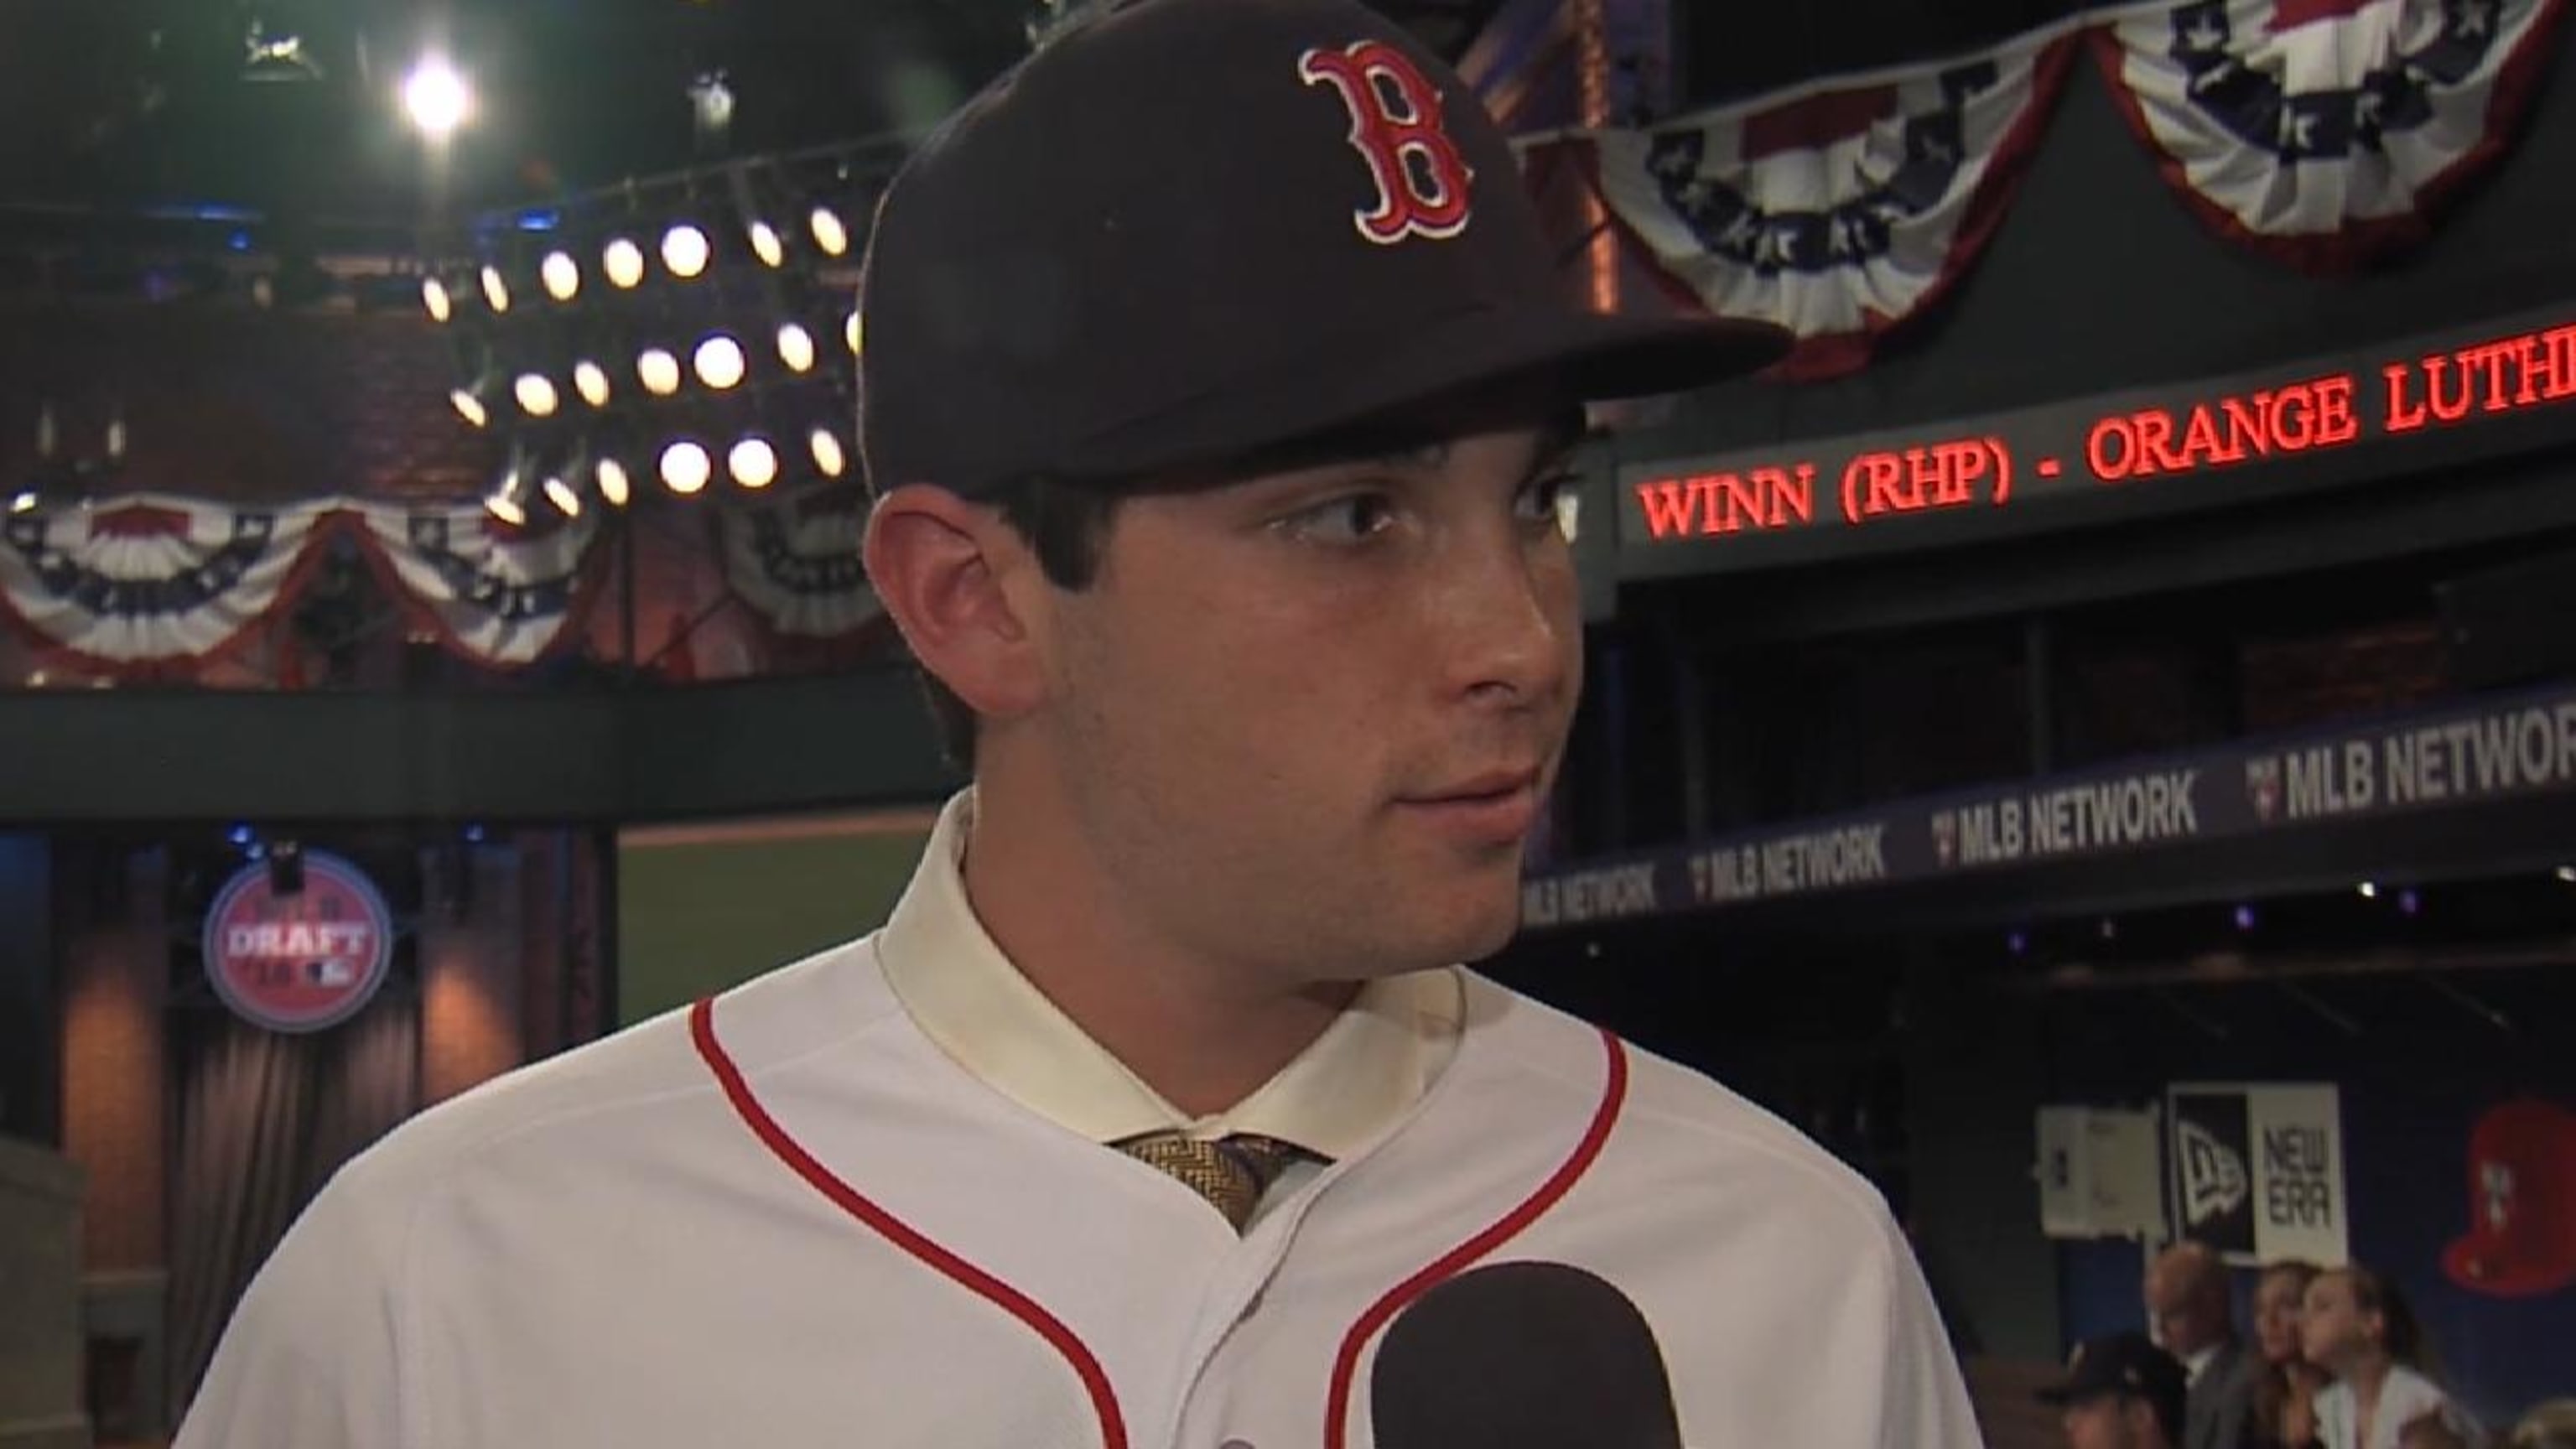 Red Sox draft pick Triston Casas excited to play at Fenway